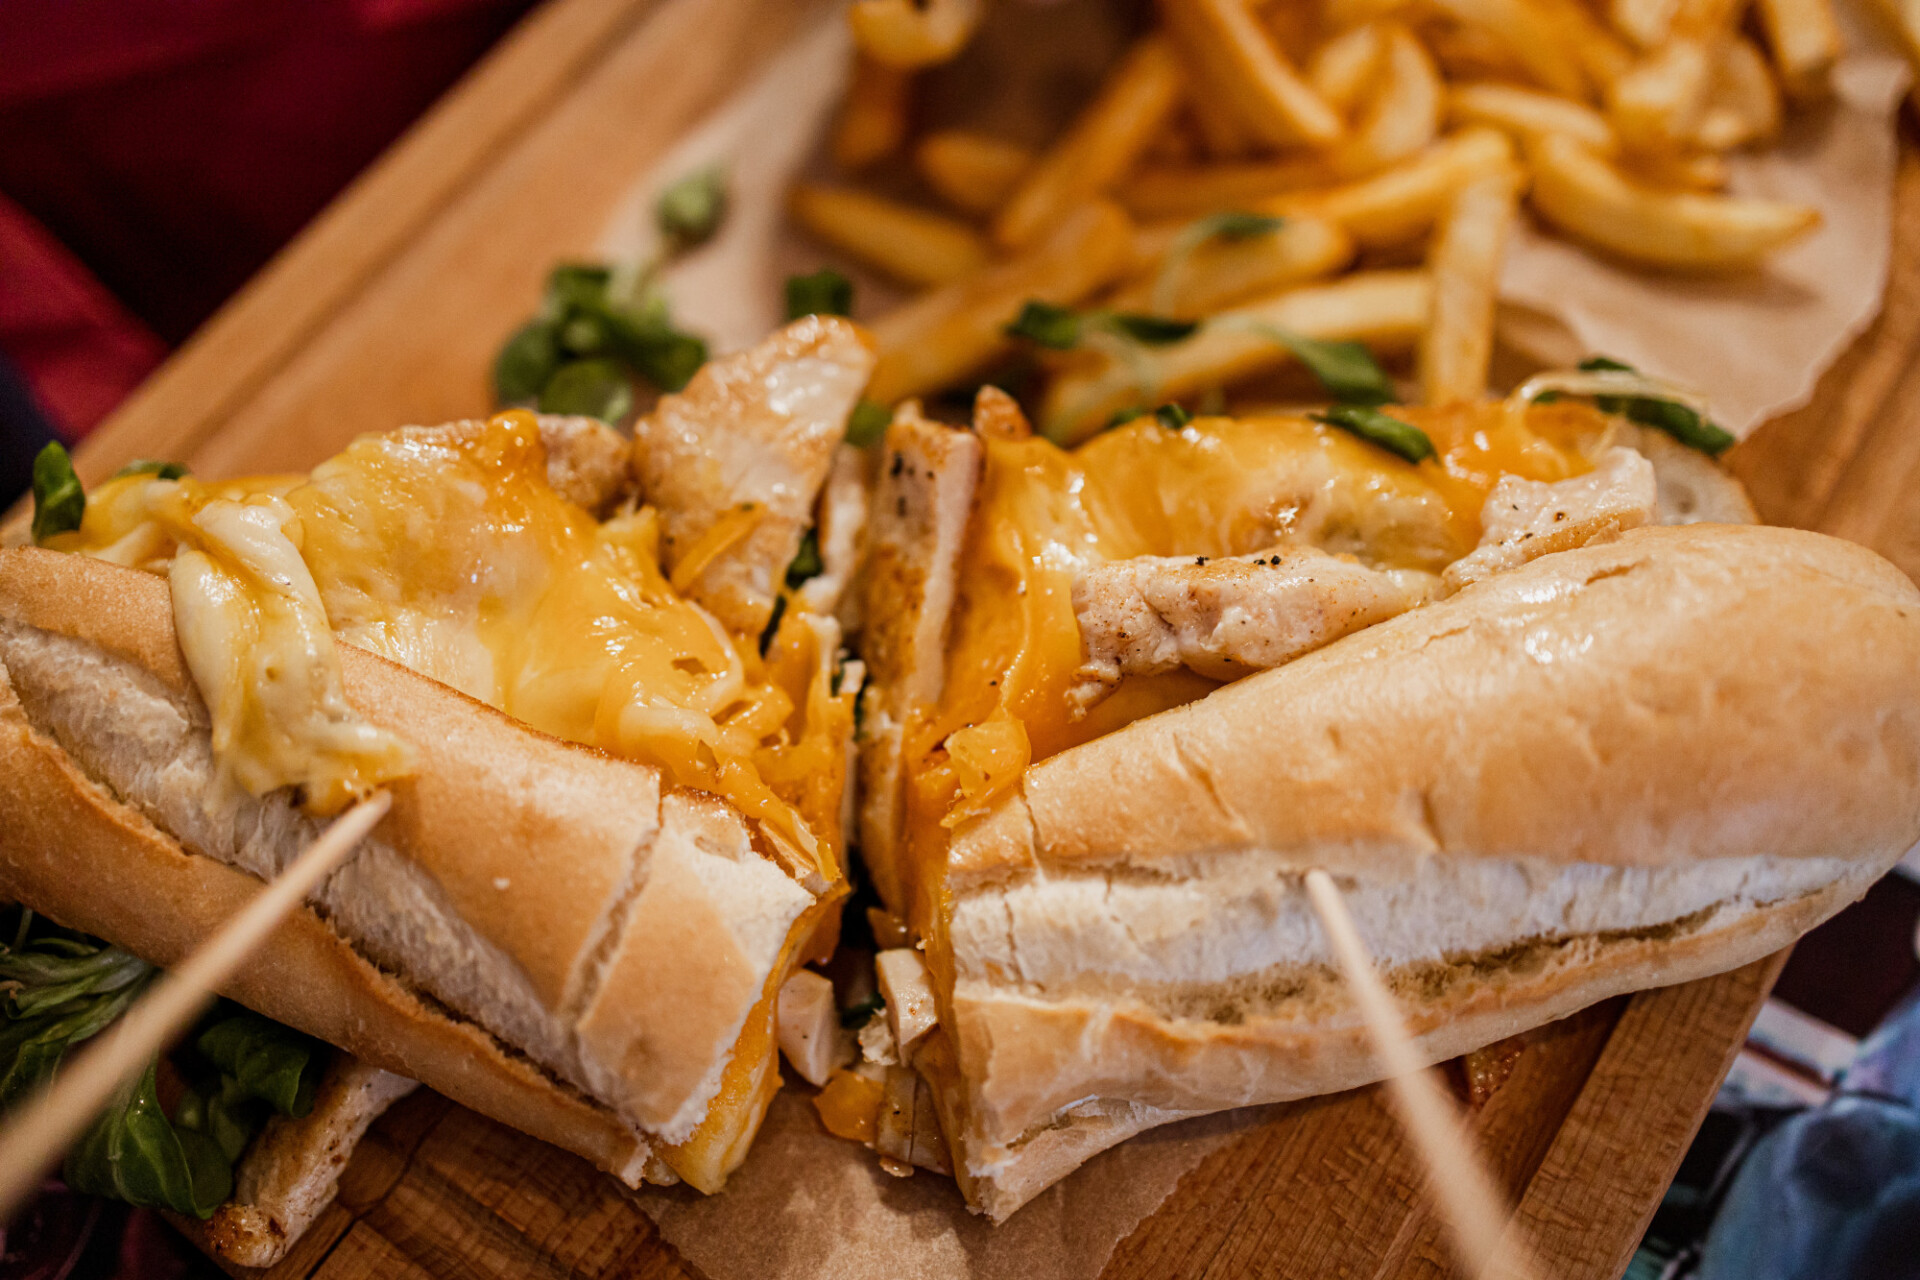 Baguette topped with melted cheese and chicken fillet served with fries